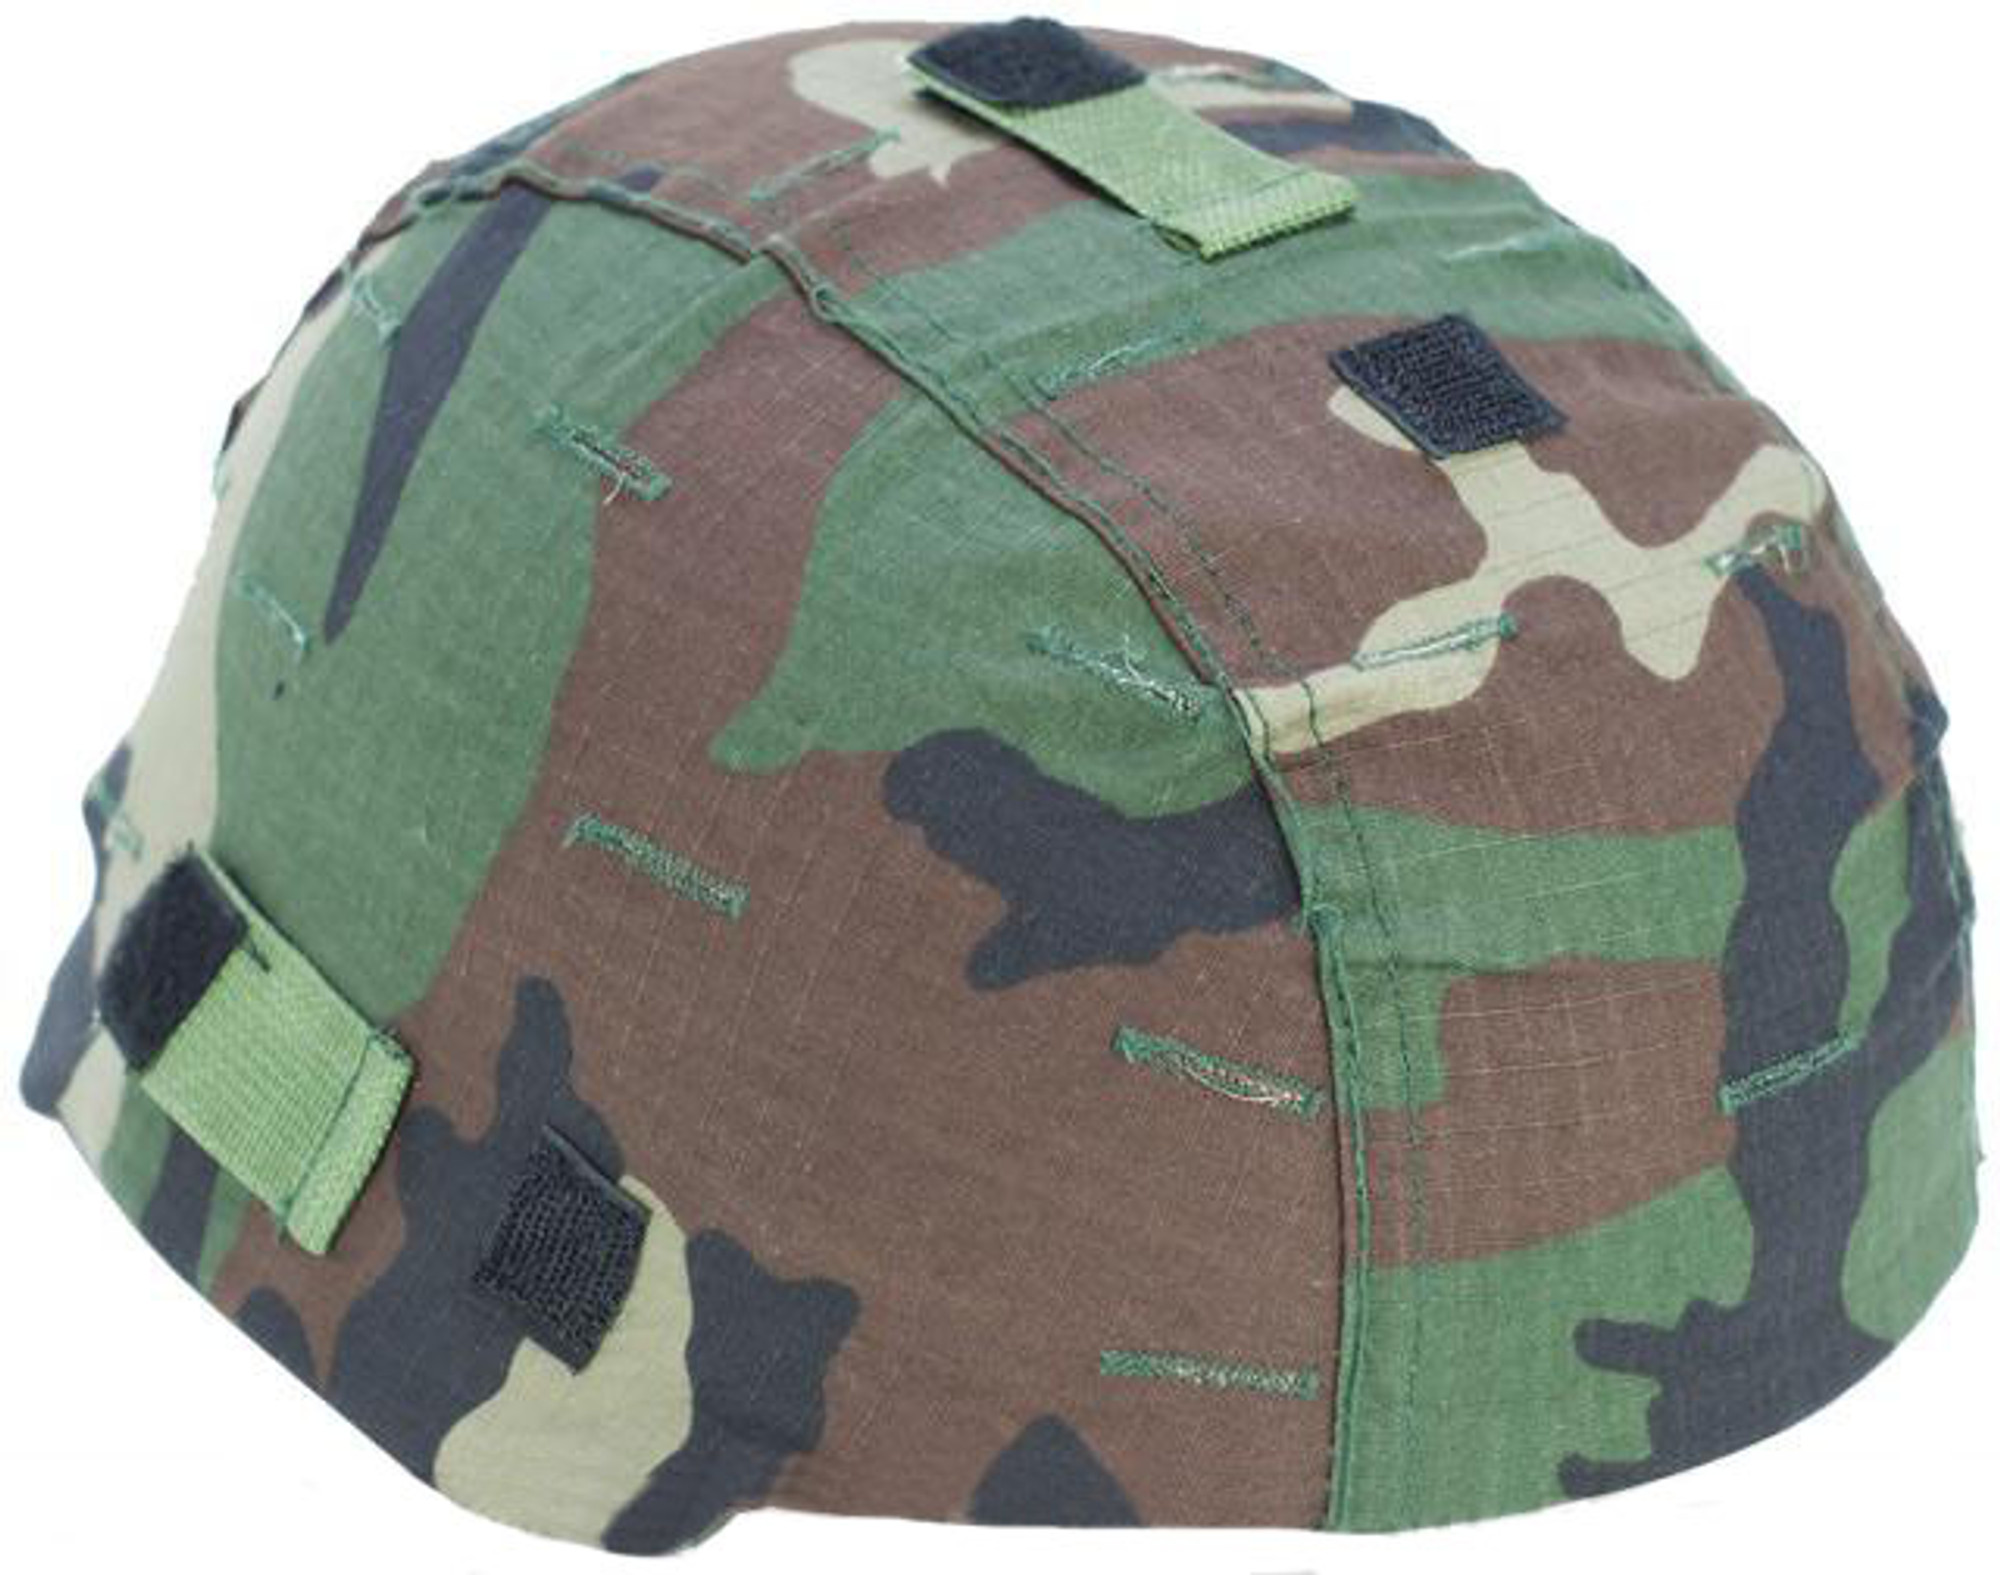 Military Style Combat Helmet Cover for MICH-2002 / T-2002 Protective Combat Helmet Series - Woodland